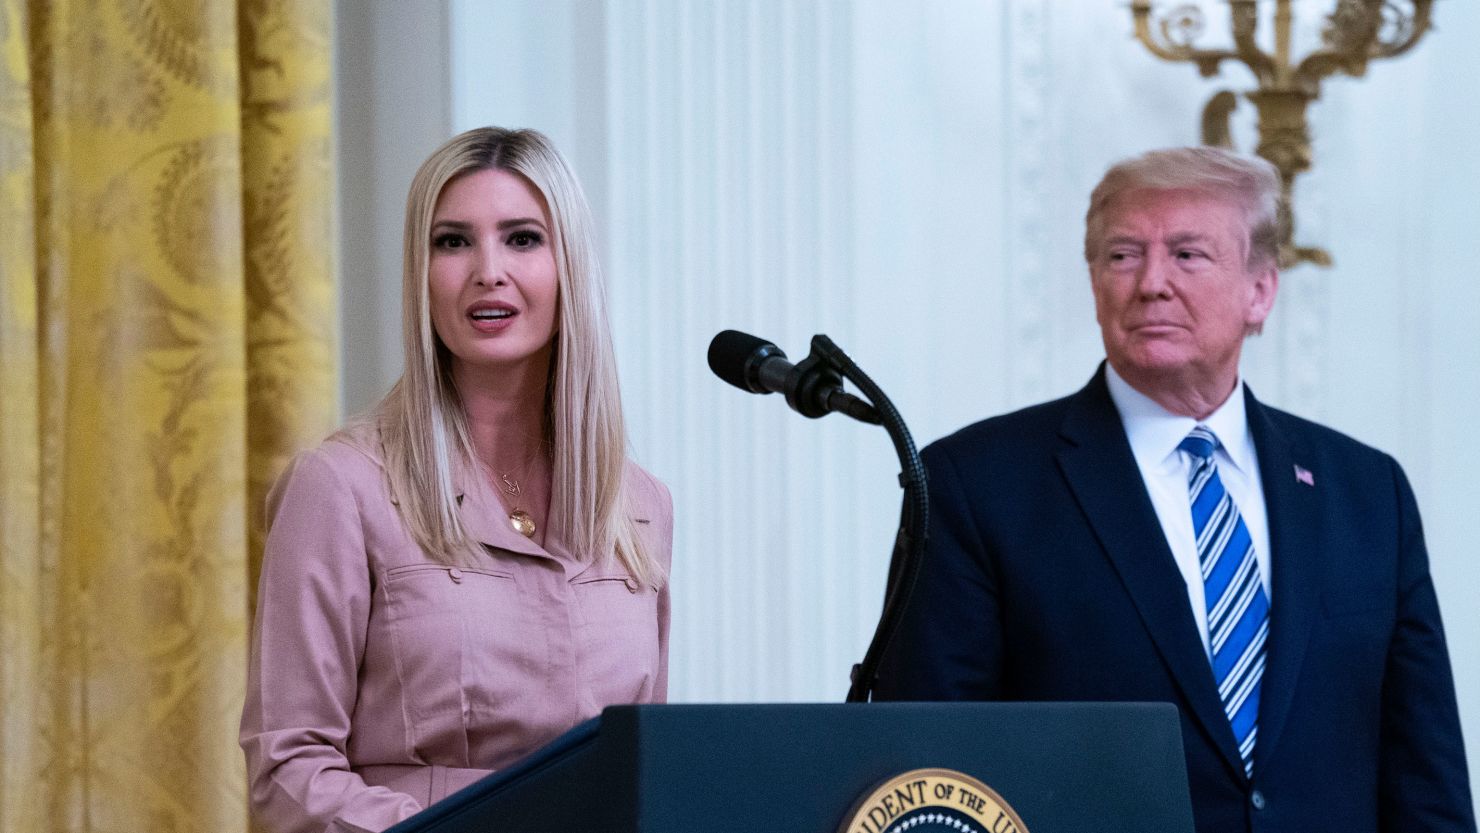 President Donald Trump watches his daughter Ivanka Trump, address an event in the East Room of the White House in Washington, April 28, 2020.